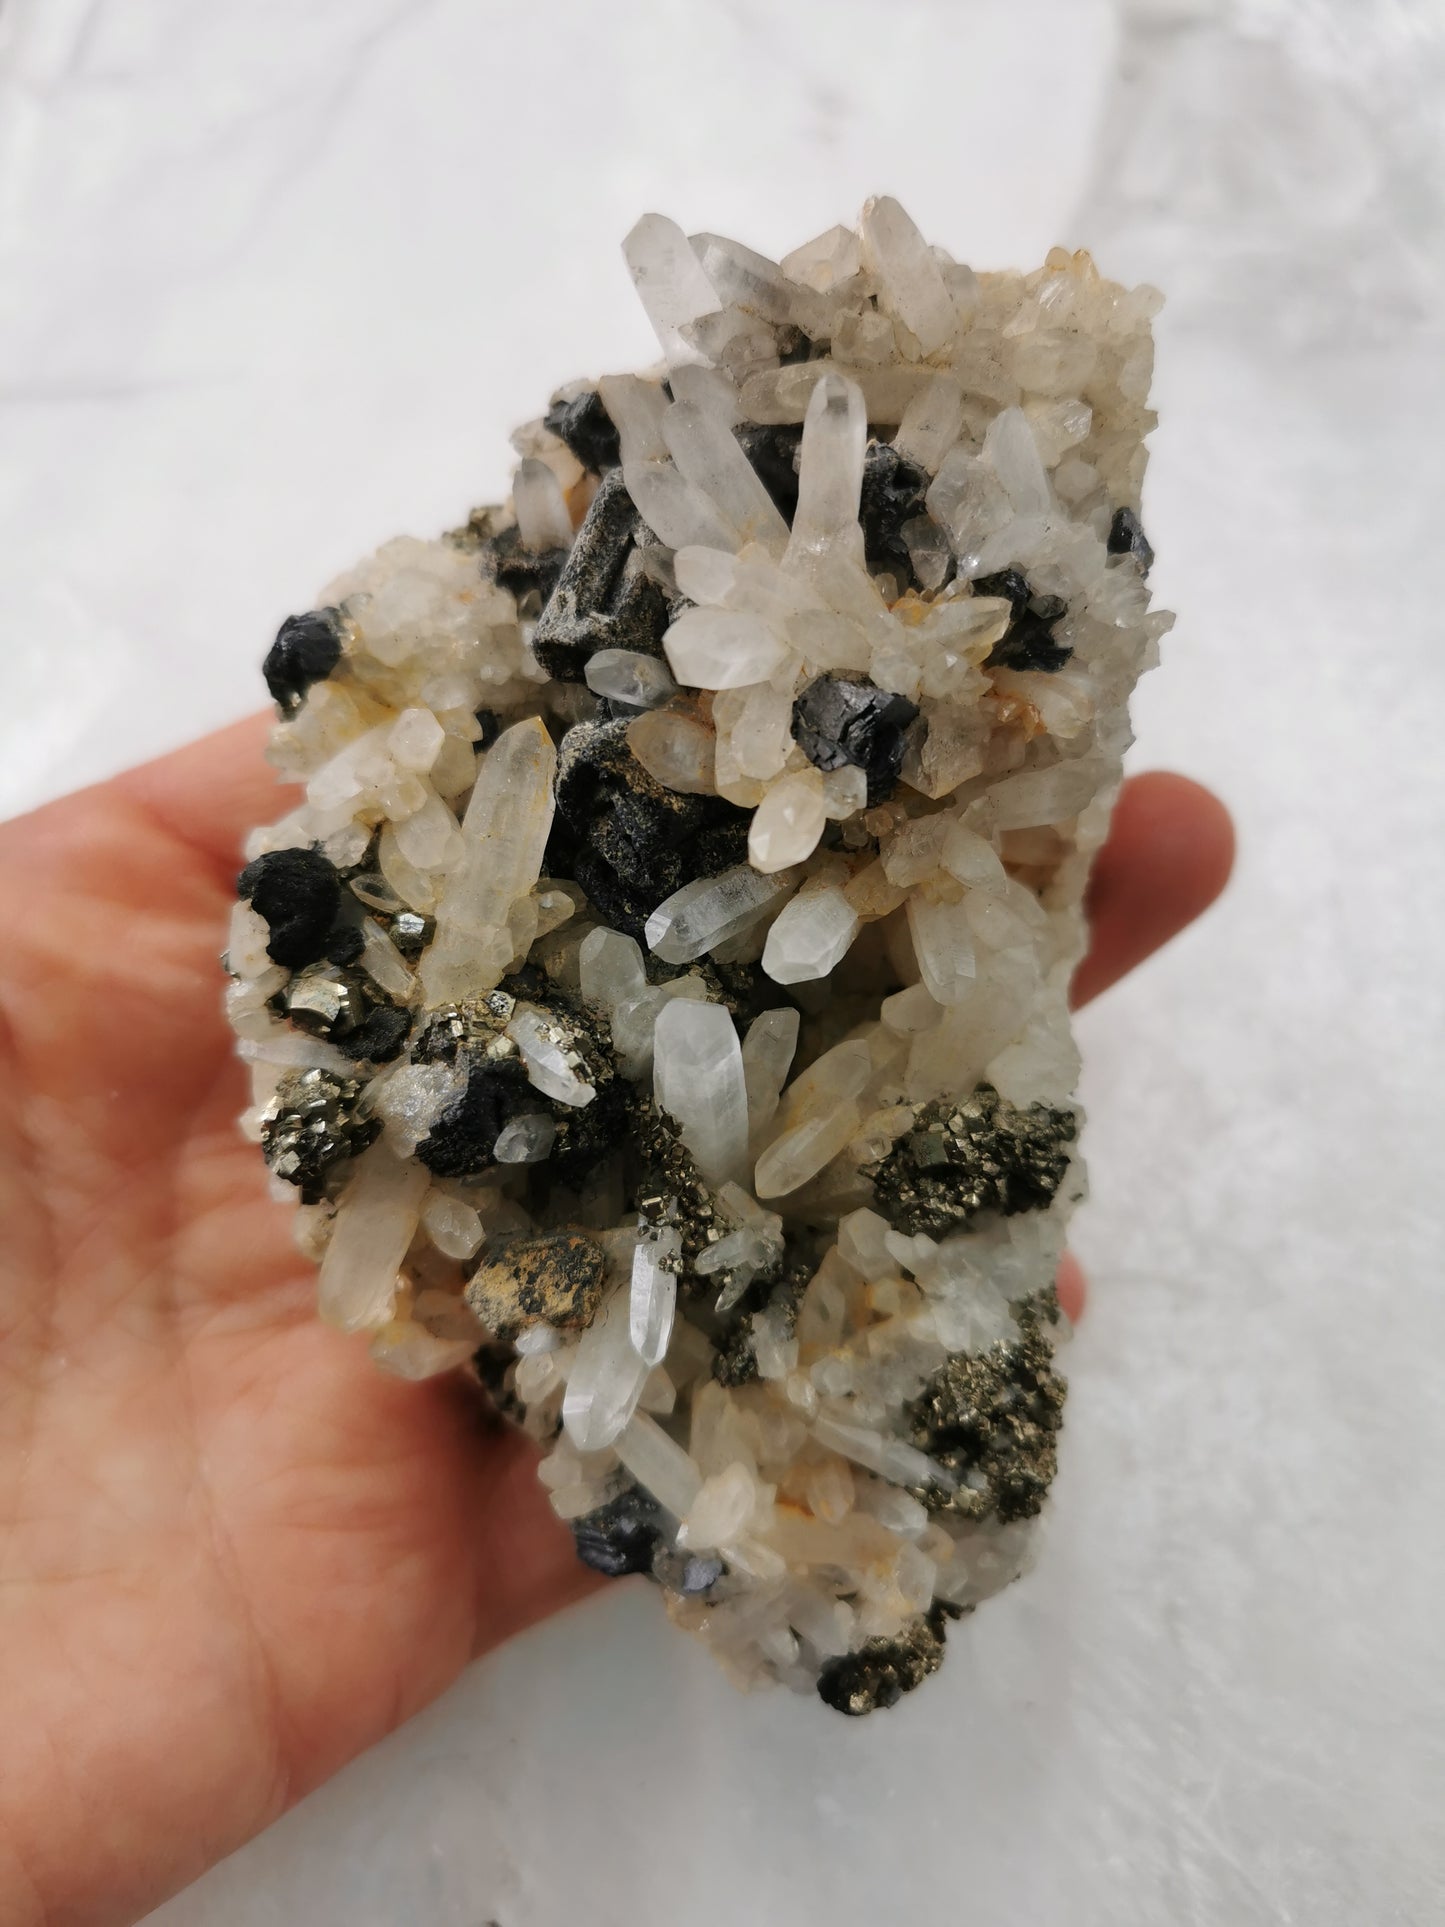 Rock crystal w/ Pyrite and Hematite